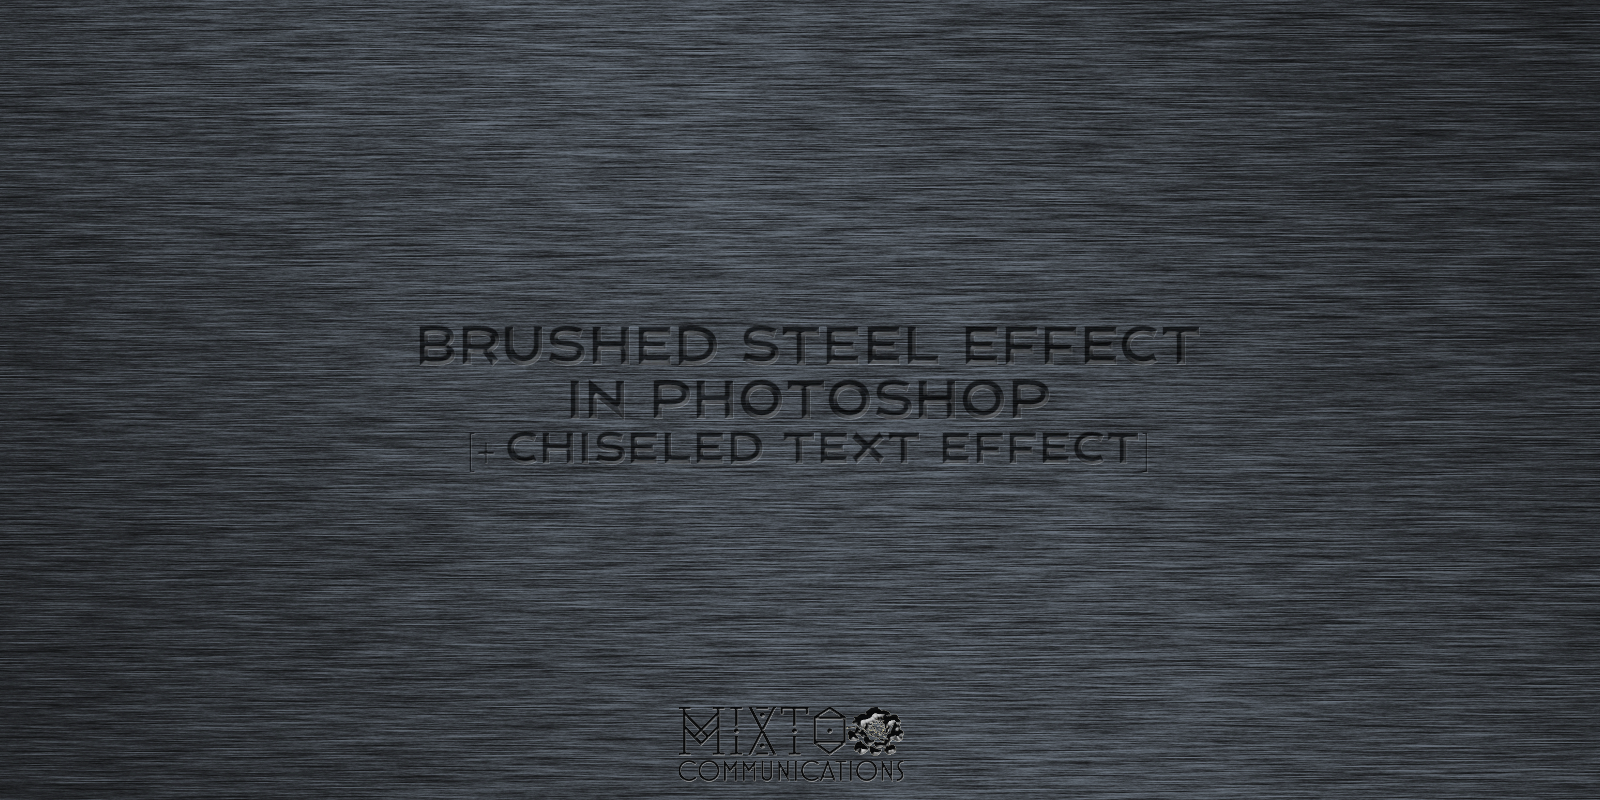 Design Challenge Days 16 17 Brushed Steel Chiseled Text Effects In Photoshop Mixto Communications